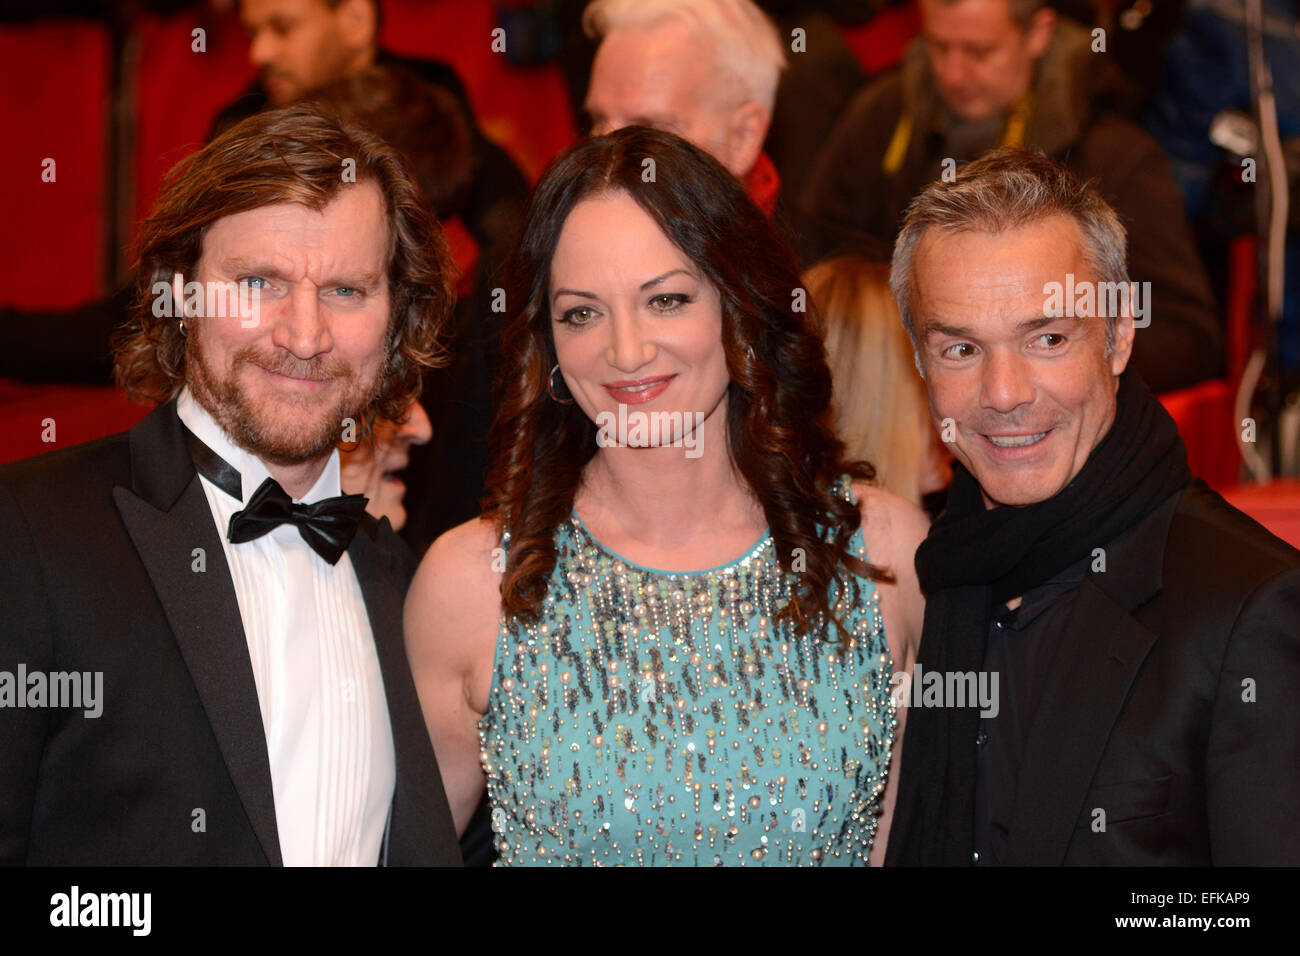 Robert Seeliger, Natalia Wörner and Hannes Jaenicke attending the 'Nadie Quiere La Noche / Nobody Wants The Night' premiere at the 65th Berlin International Film Festival / Berlinale 2015 on February 05, 2015./picture alliance Stock Photo